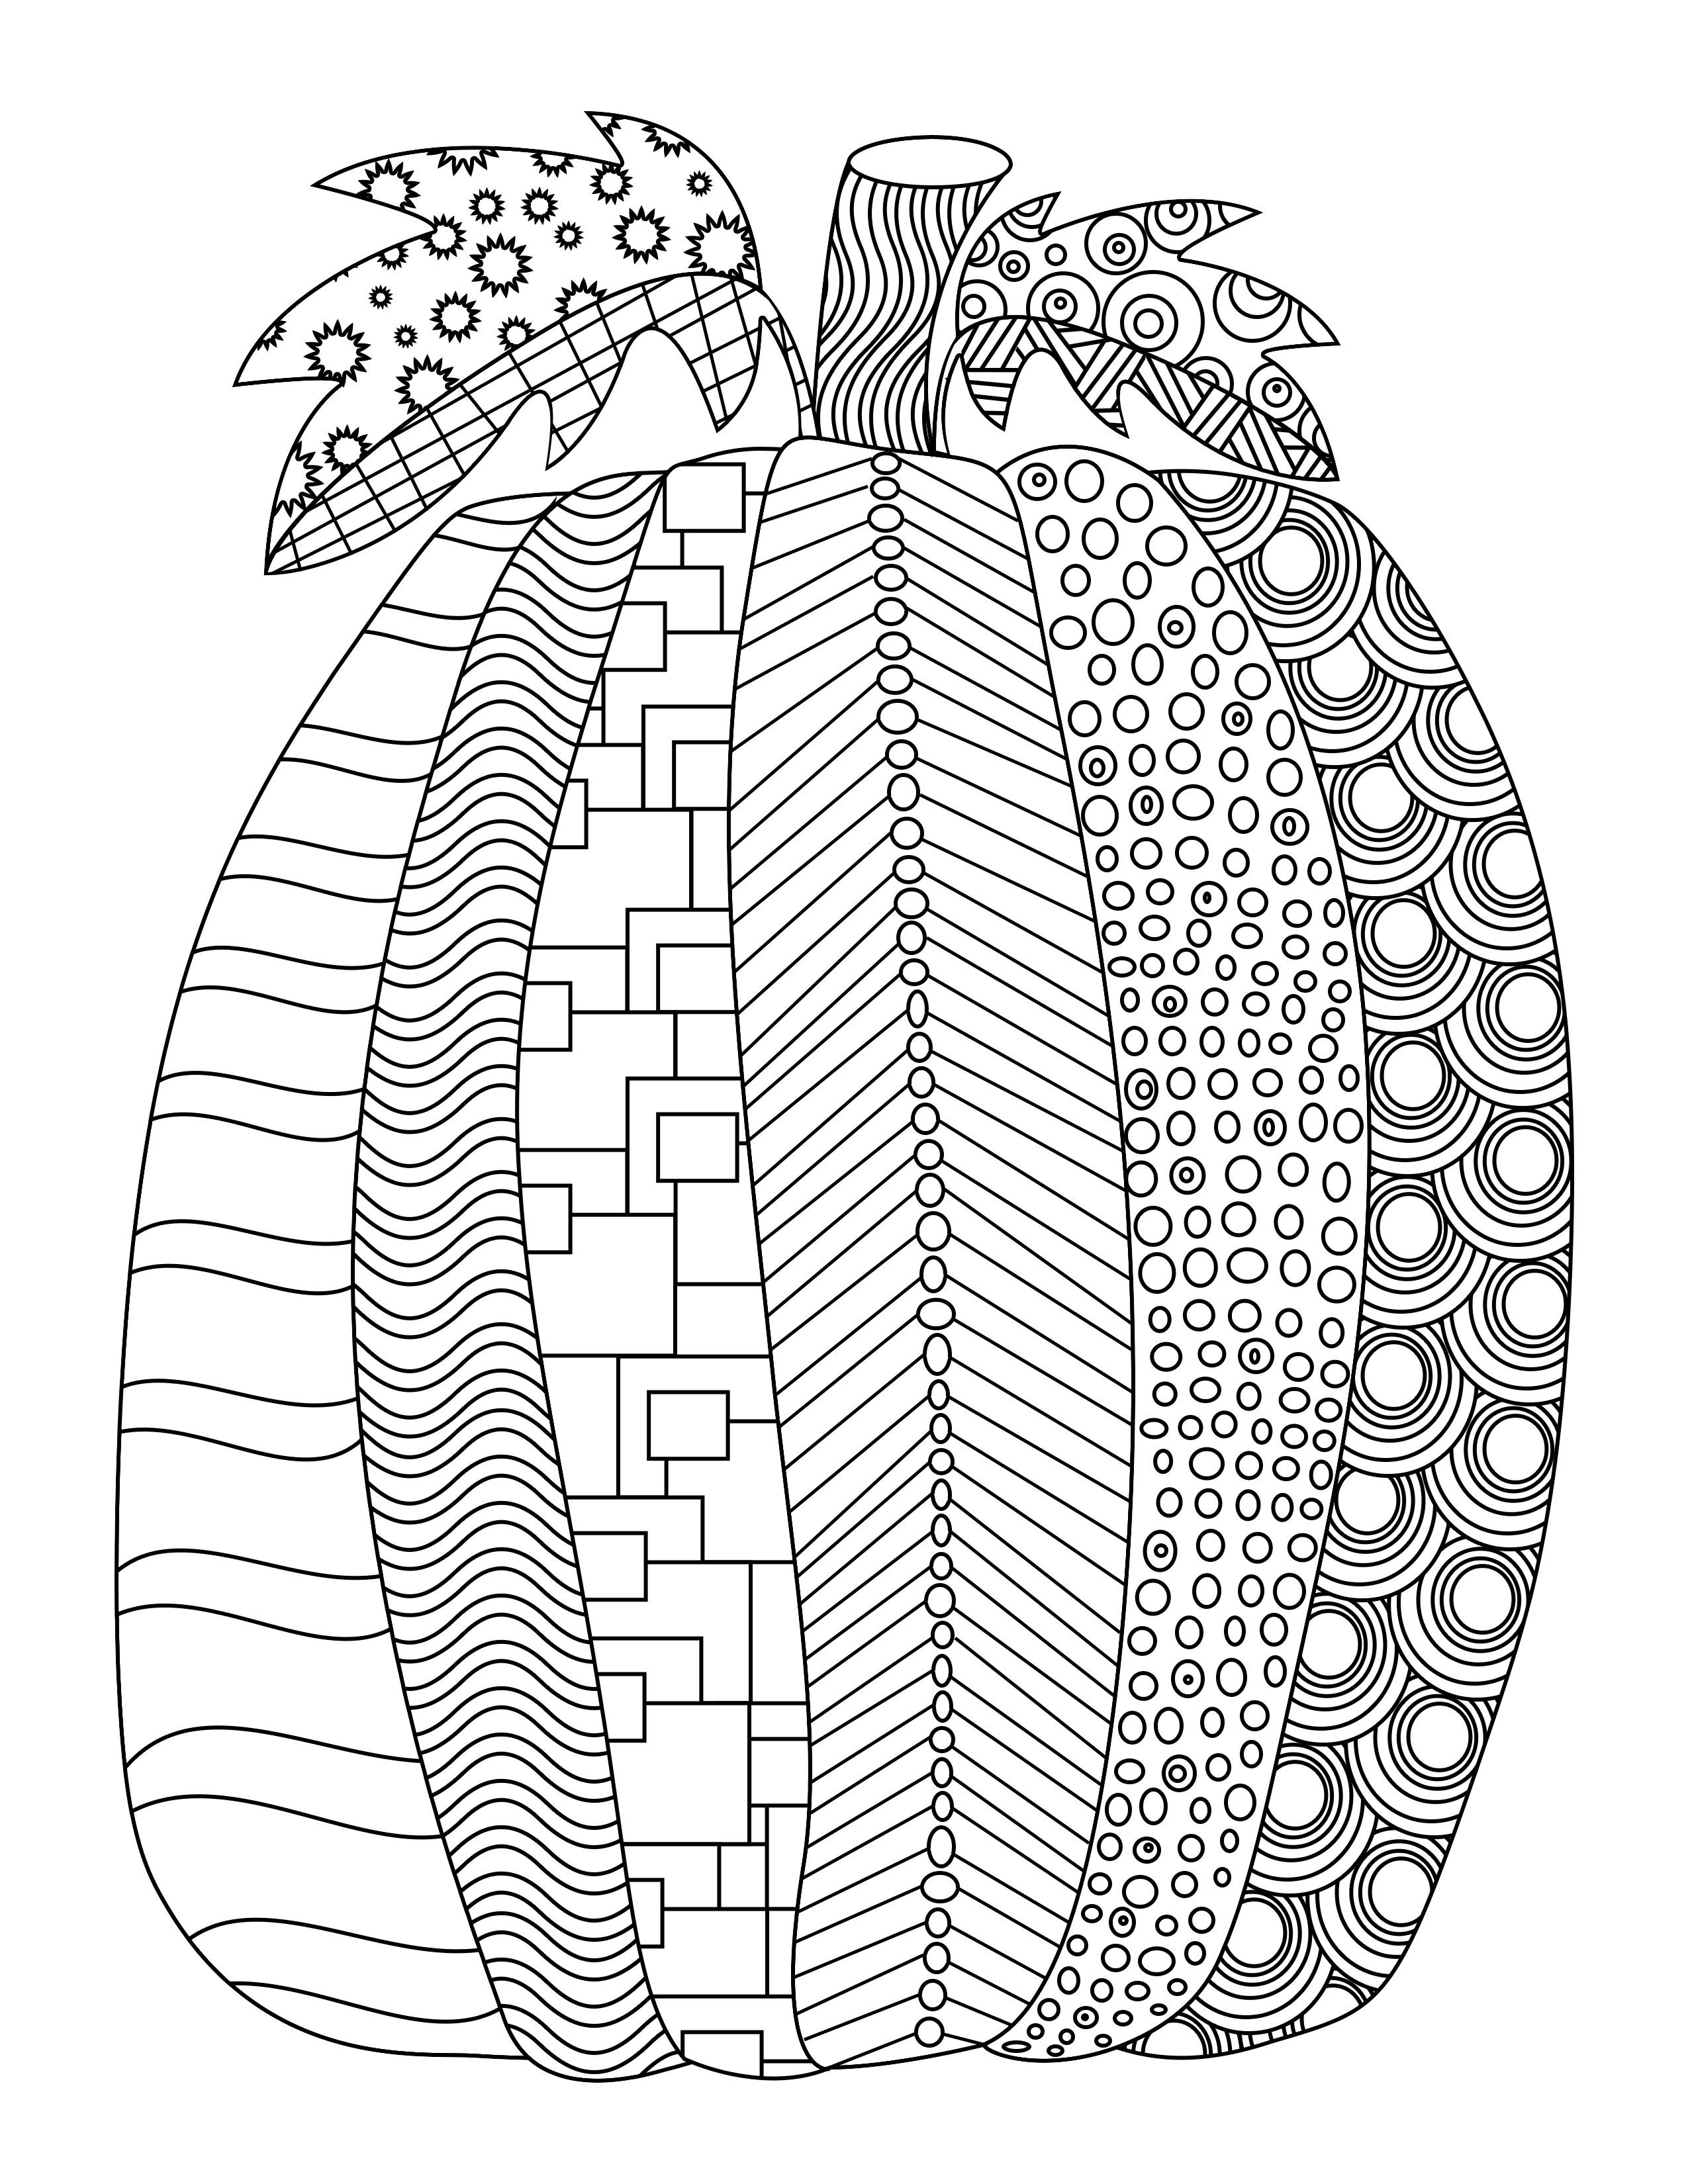 Fall Coloring Page 10 Fall Coloring Pages For Adults Topsailmultimedia